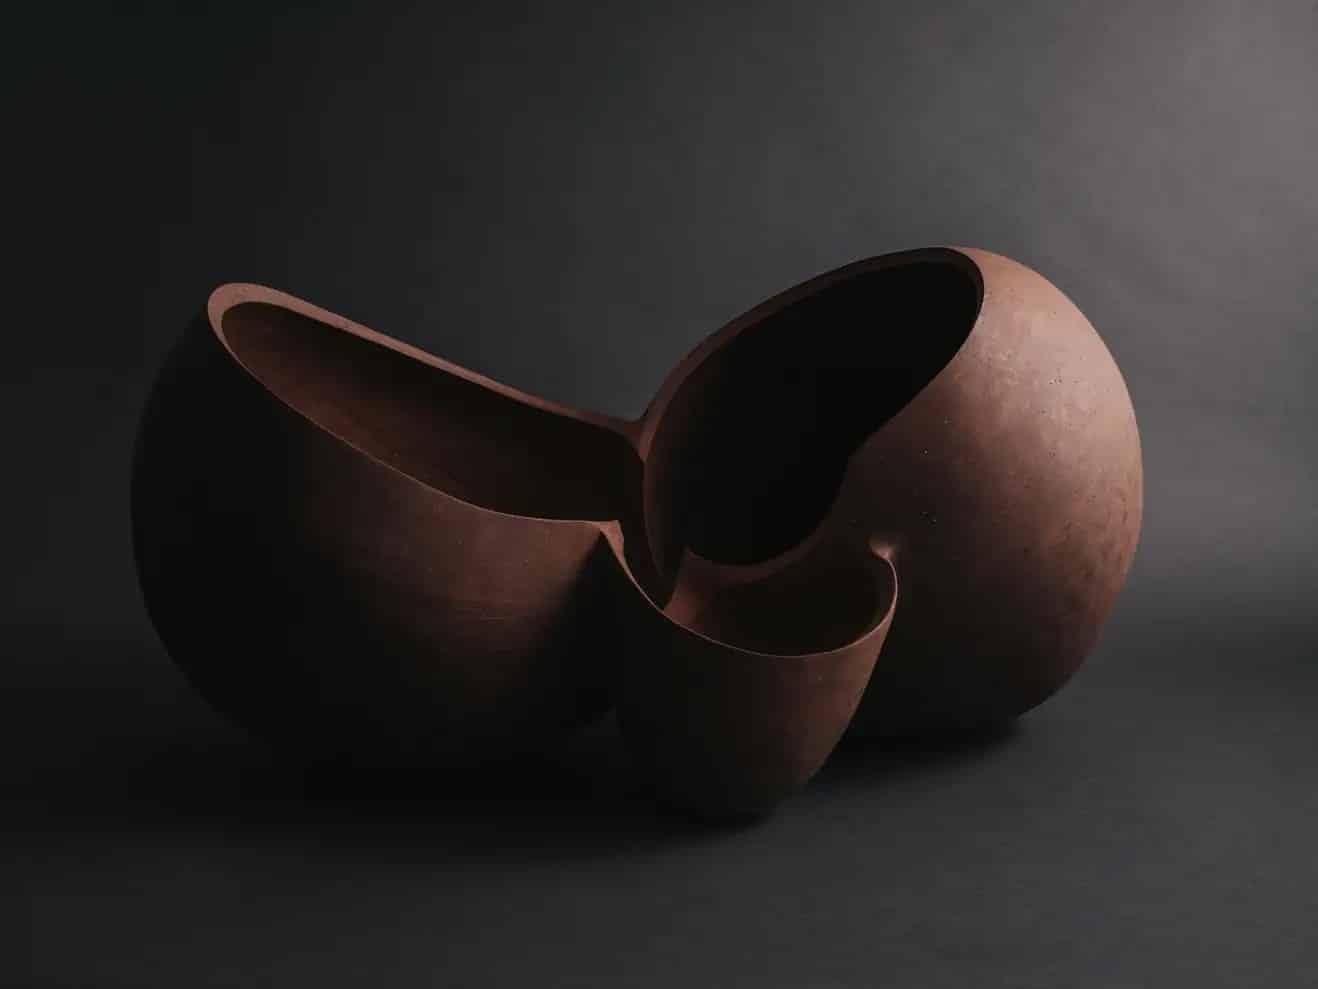 Zoë Powell’s Magnolia 05 Vessel Is Handmade from Clay She Unearthed Herself